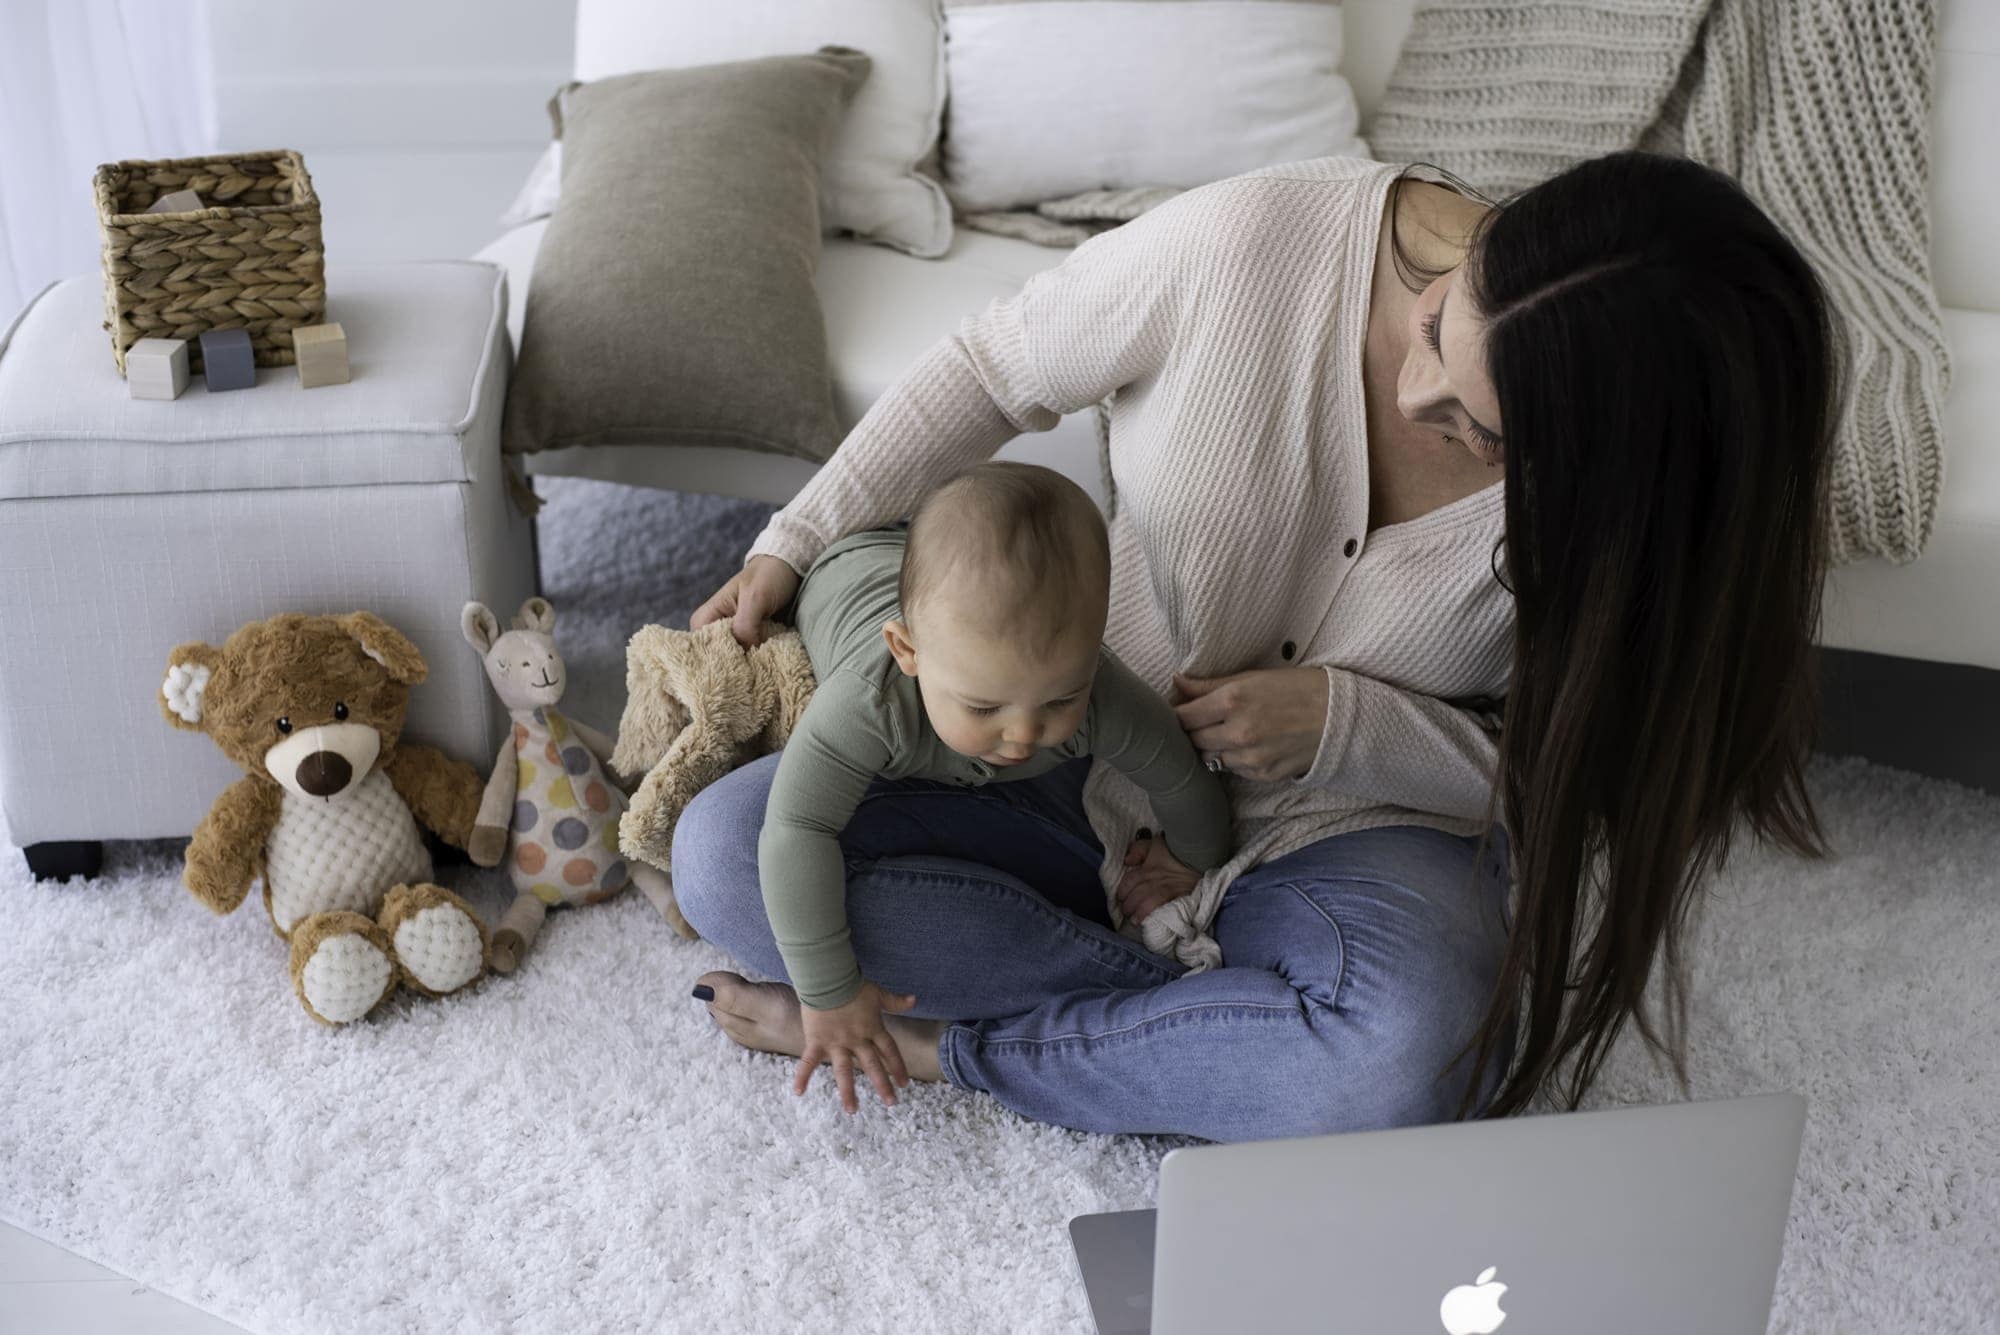 32 Best Stay At Home Jobs For Moms & Dads (Great, Flexible Ideas!). Becoming a mom is one of the best things to ever happen to me, and I love that my job is flexible enough that I get to spend time playing with my daughter and watching her grow up. While I know that this isn't for everyone, parents have a range of options these days. Jobs for stay-at home moms with no degree, Freelance jobs for parents, Online jobs for stay at home moms and dads